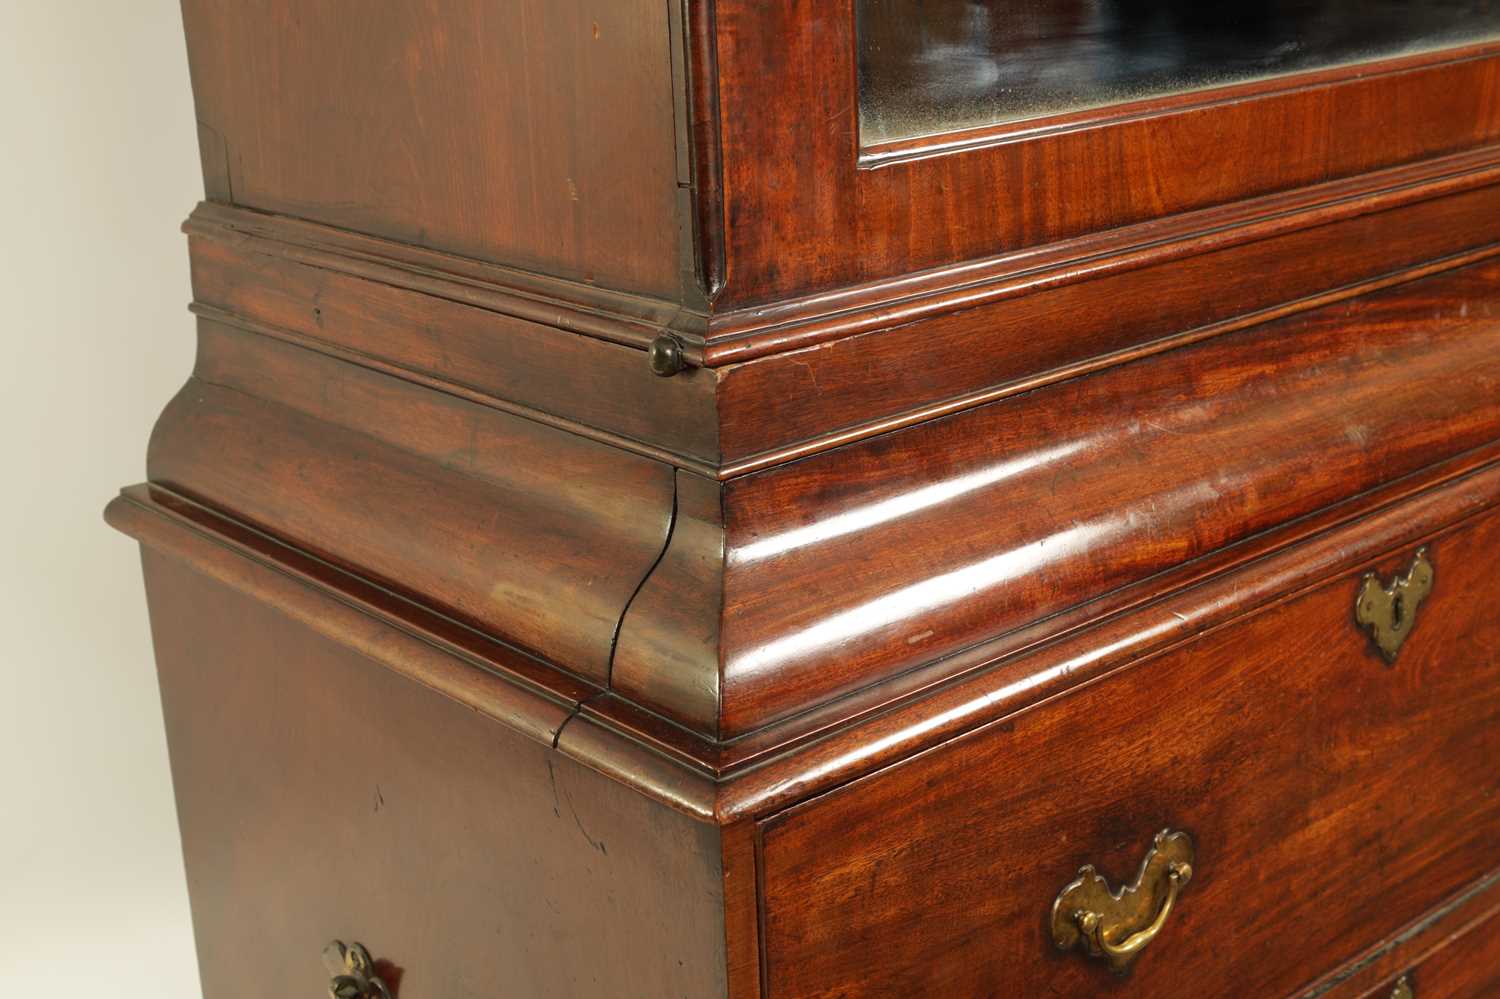 A FINE GEORGE II FIGURED MAHOGANY ARCHITECTURAL SECRETAIRE CABINET IN THE MANNER OF JOHN CHANNON - Image 14 of 14